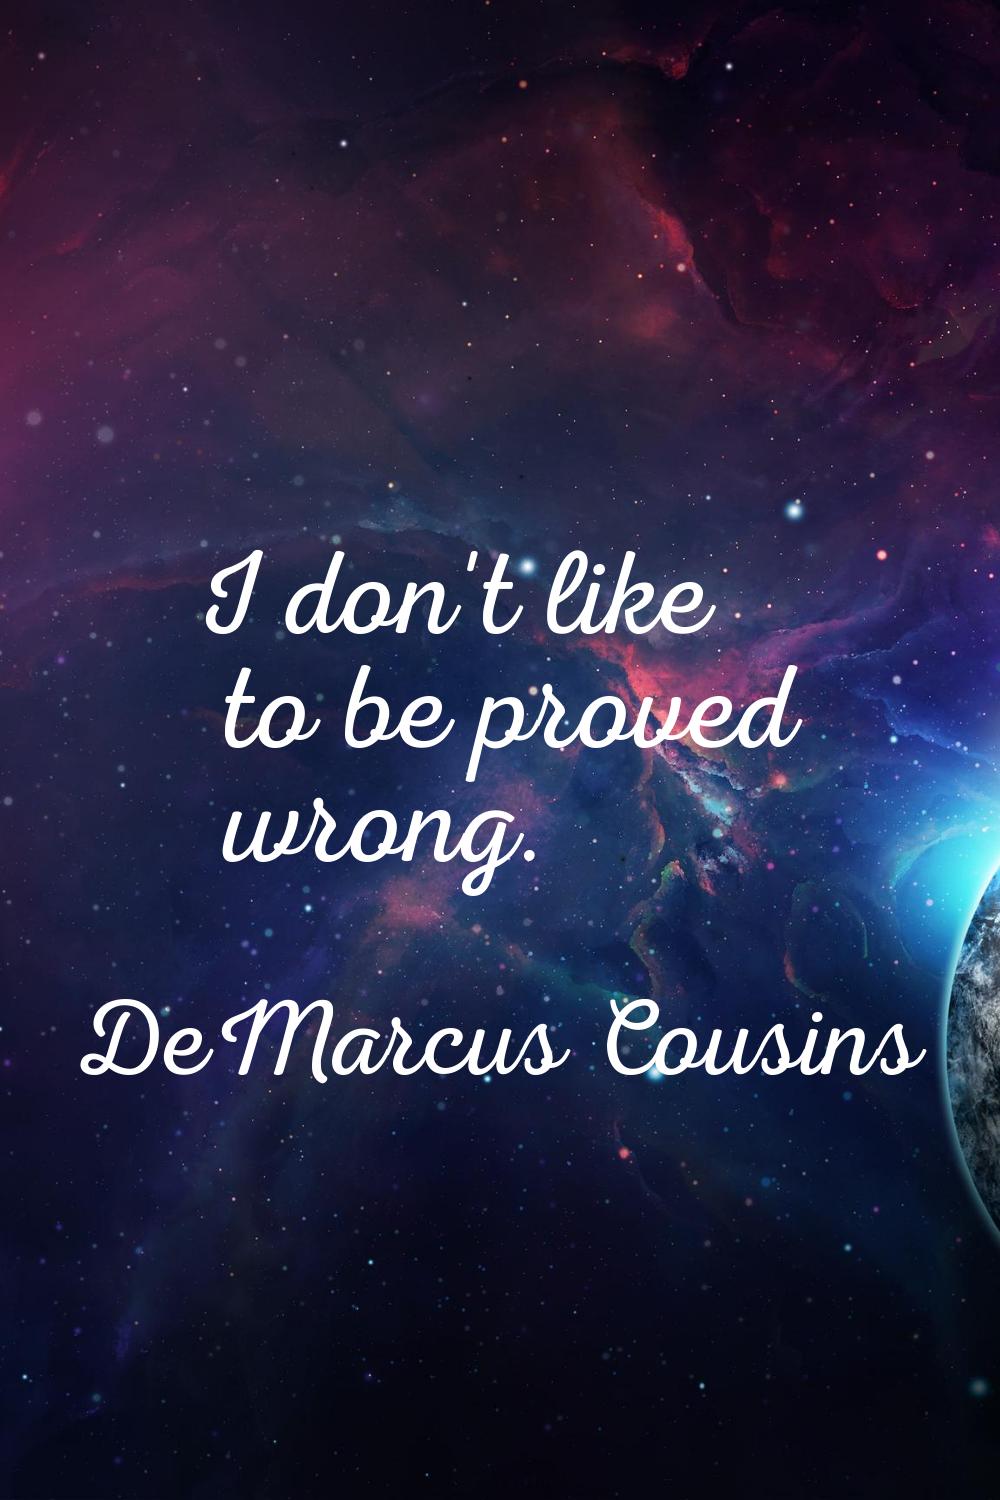 I don't like to be proved wrong.